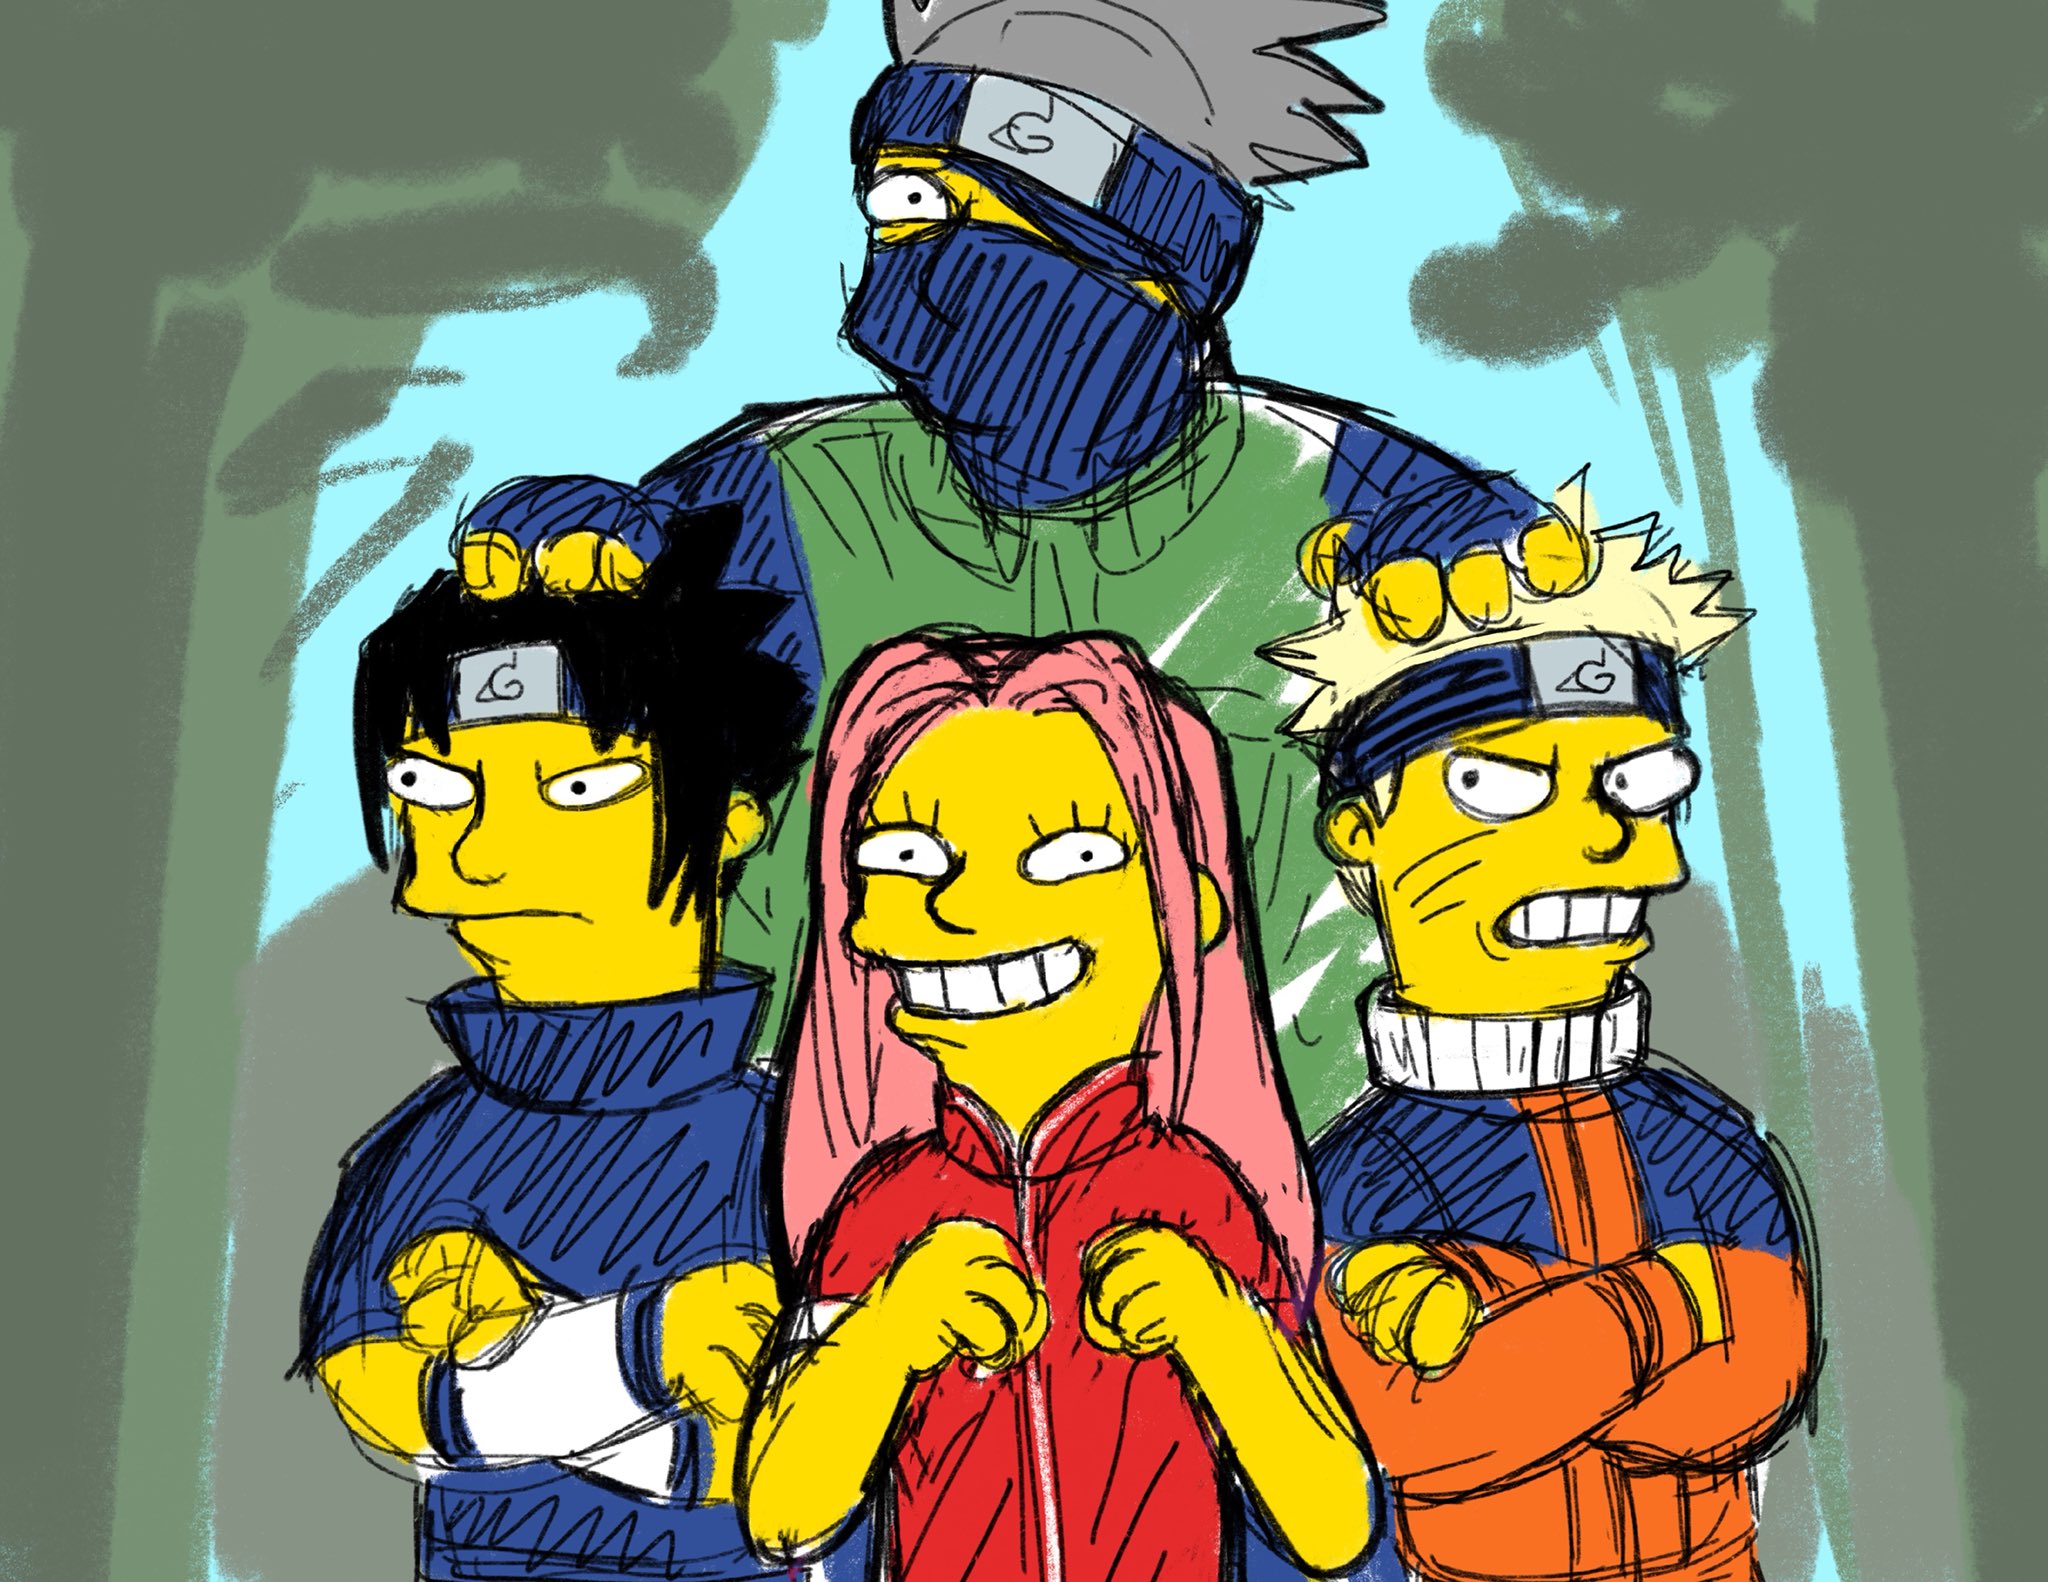 â€œhi welcome to my cursed simpsons naruto crossover auâ€� .